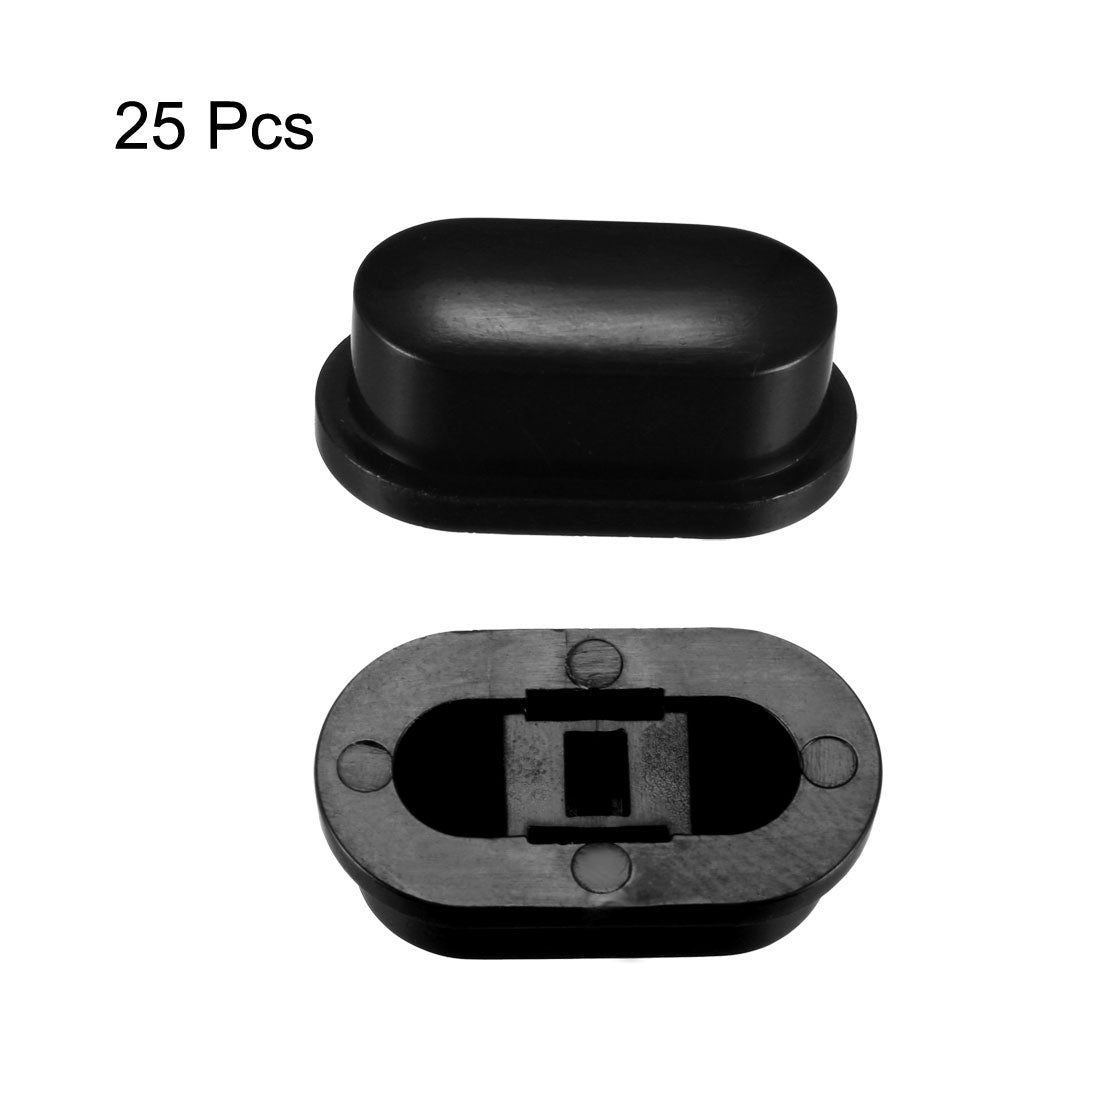 uxcell Uxcell 25Pcs Plastic 18x10x7mm Latching Pushbutton Tactile Switch Caps Cover Keycaps Protector Black